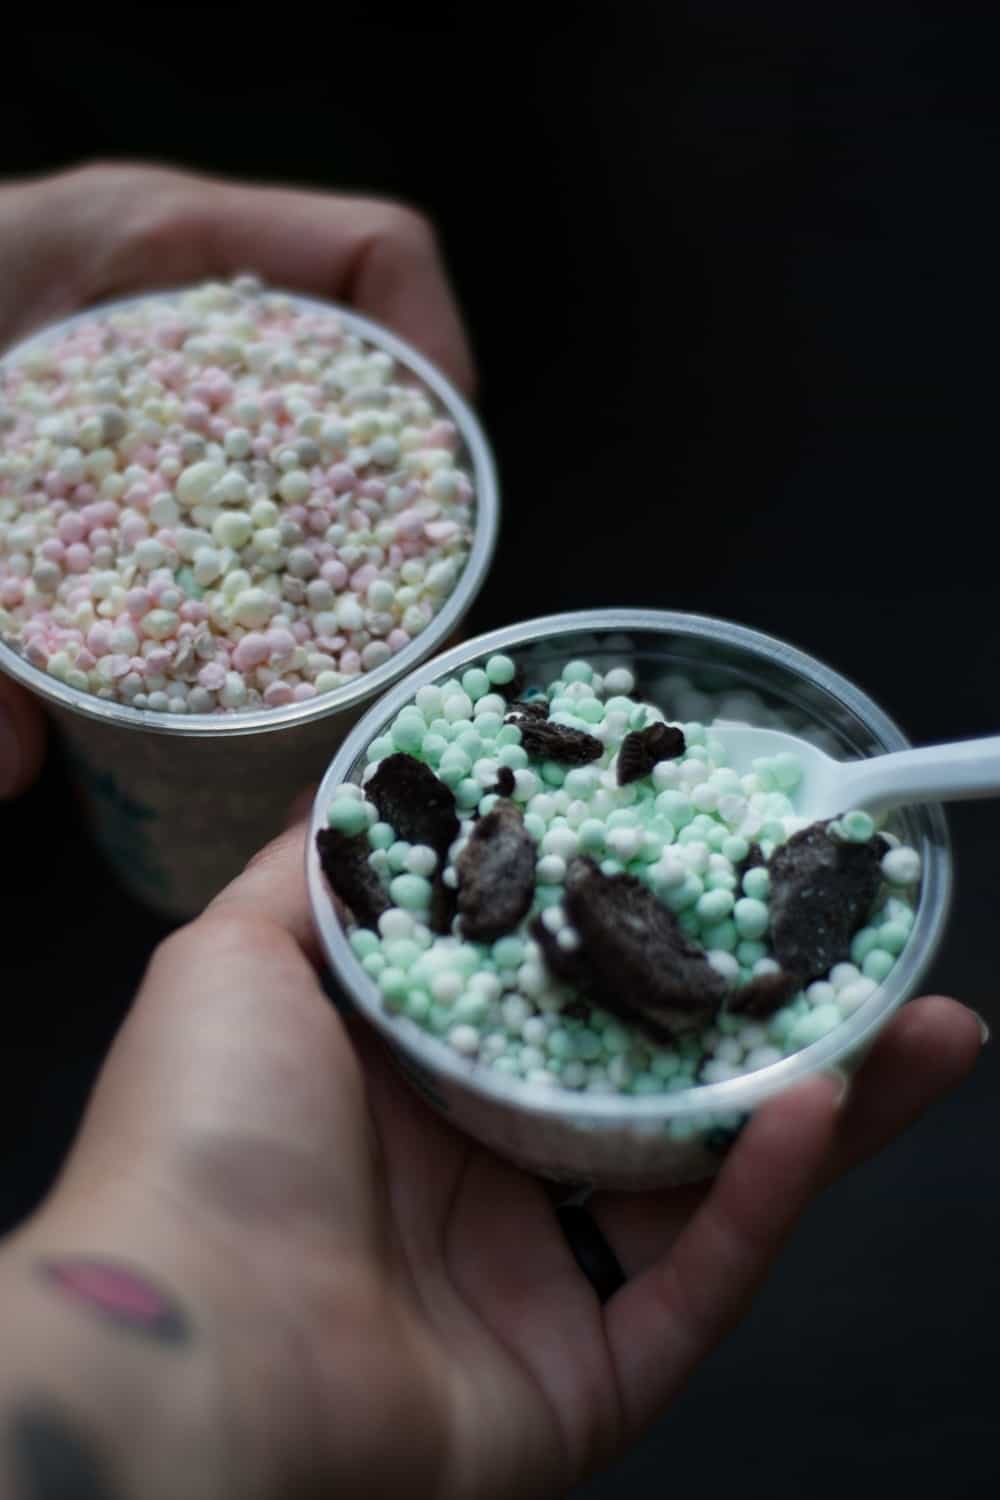 Hands with Tattoo Holding Dippin Dots Ice Cream